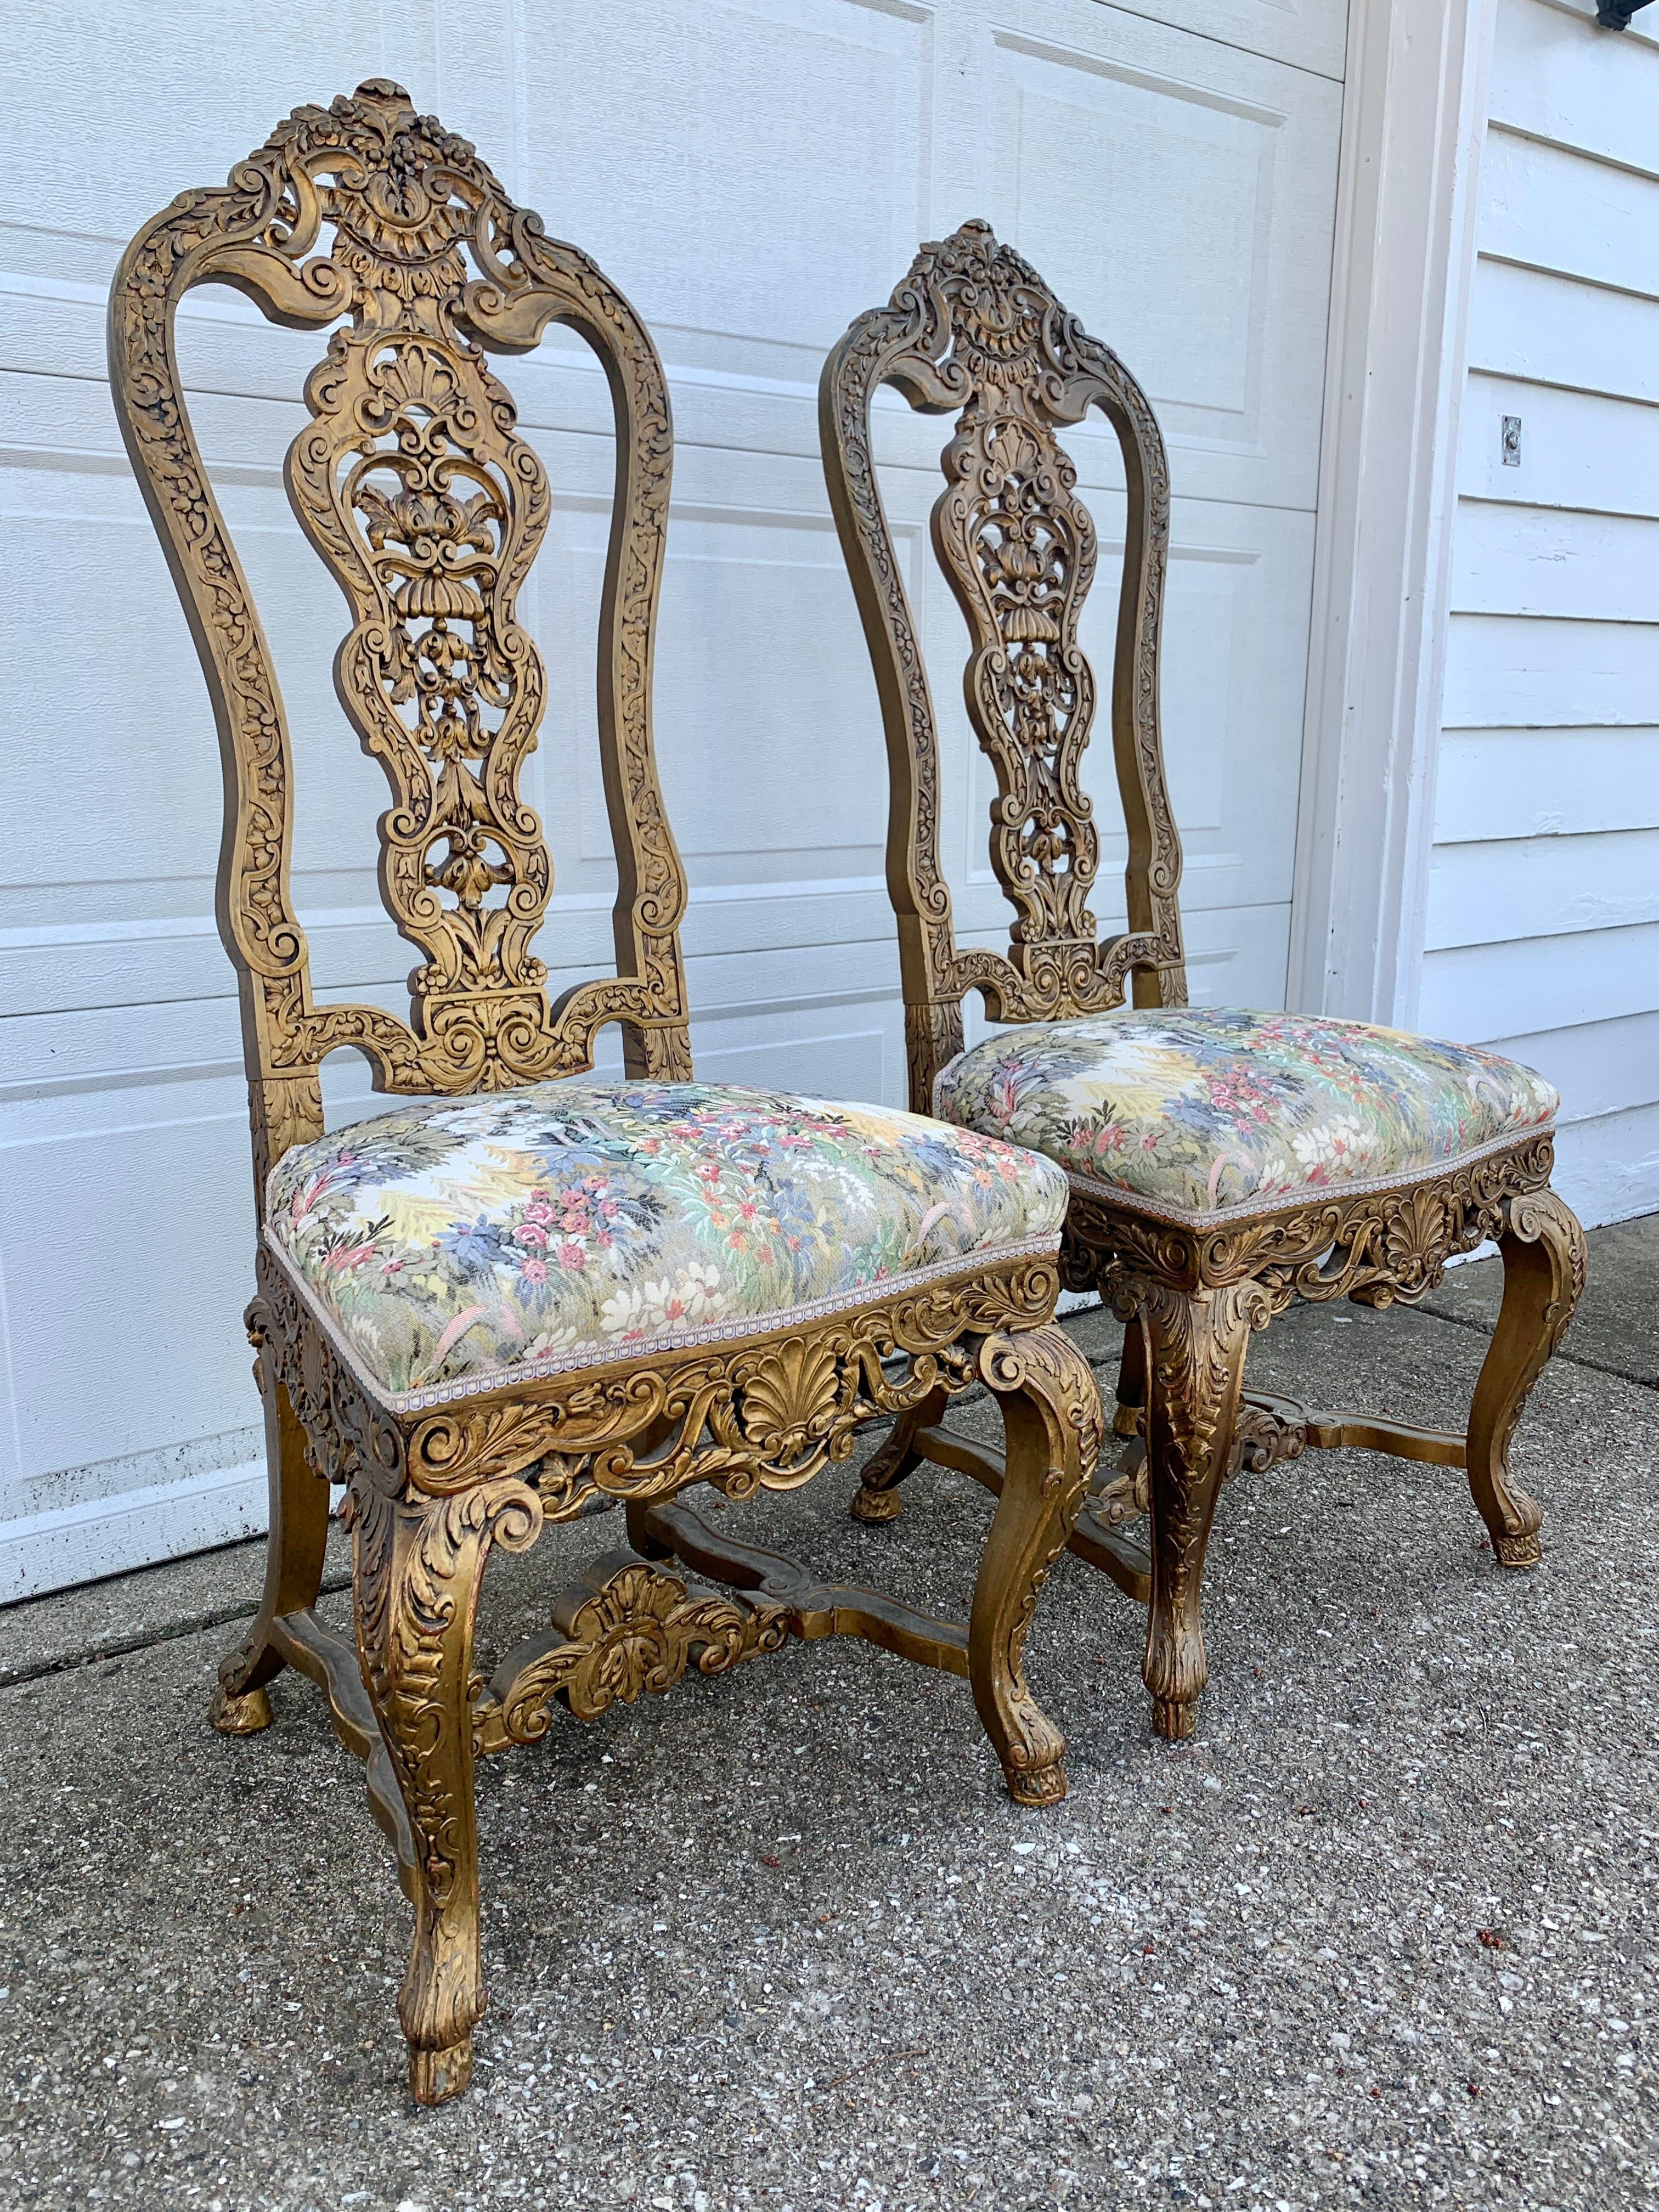 19th Century Antique Venetian Carved Gold Giltwood Throne Chairs, Pair In Good Condition For Sale In Elkhart, IN